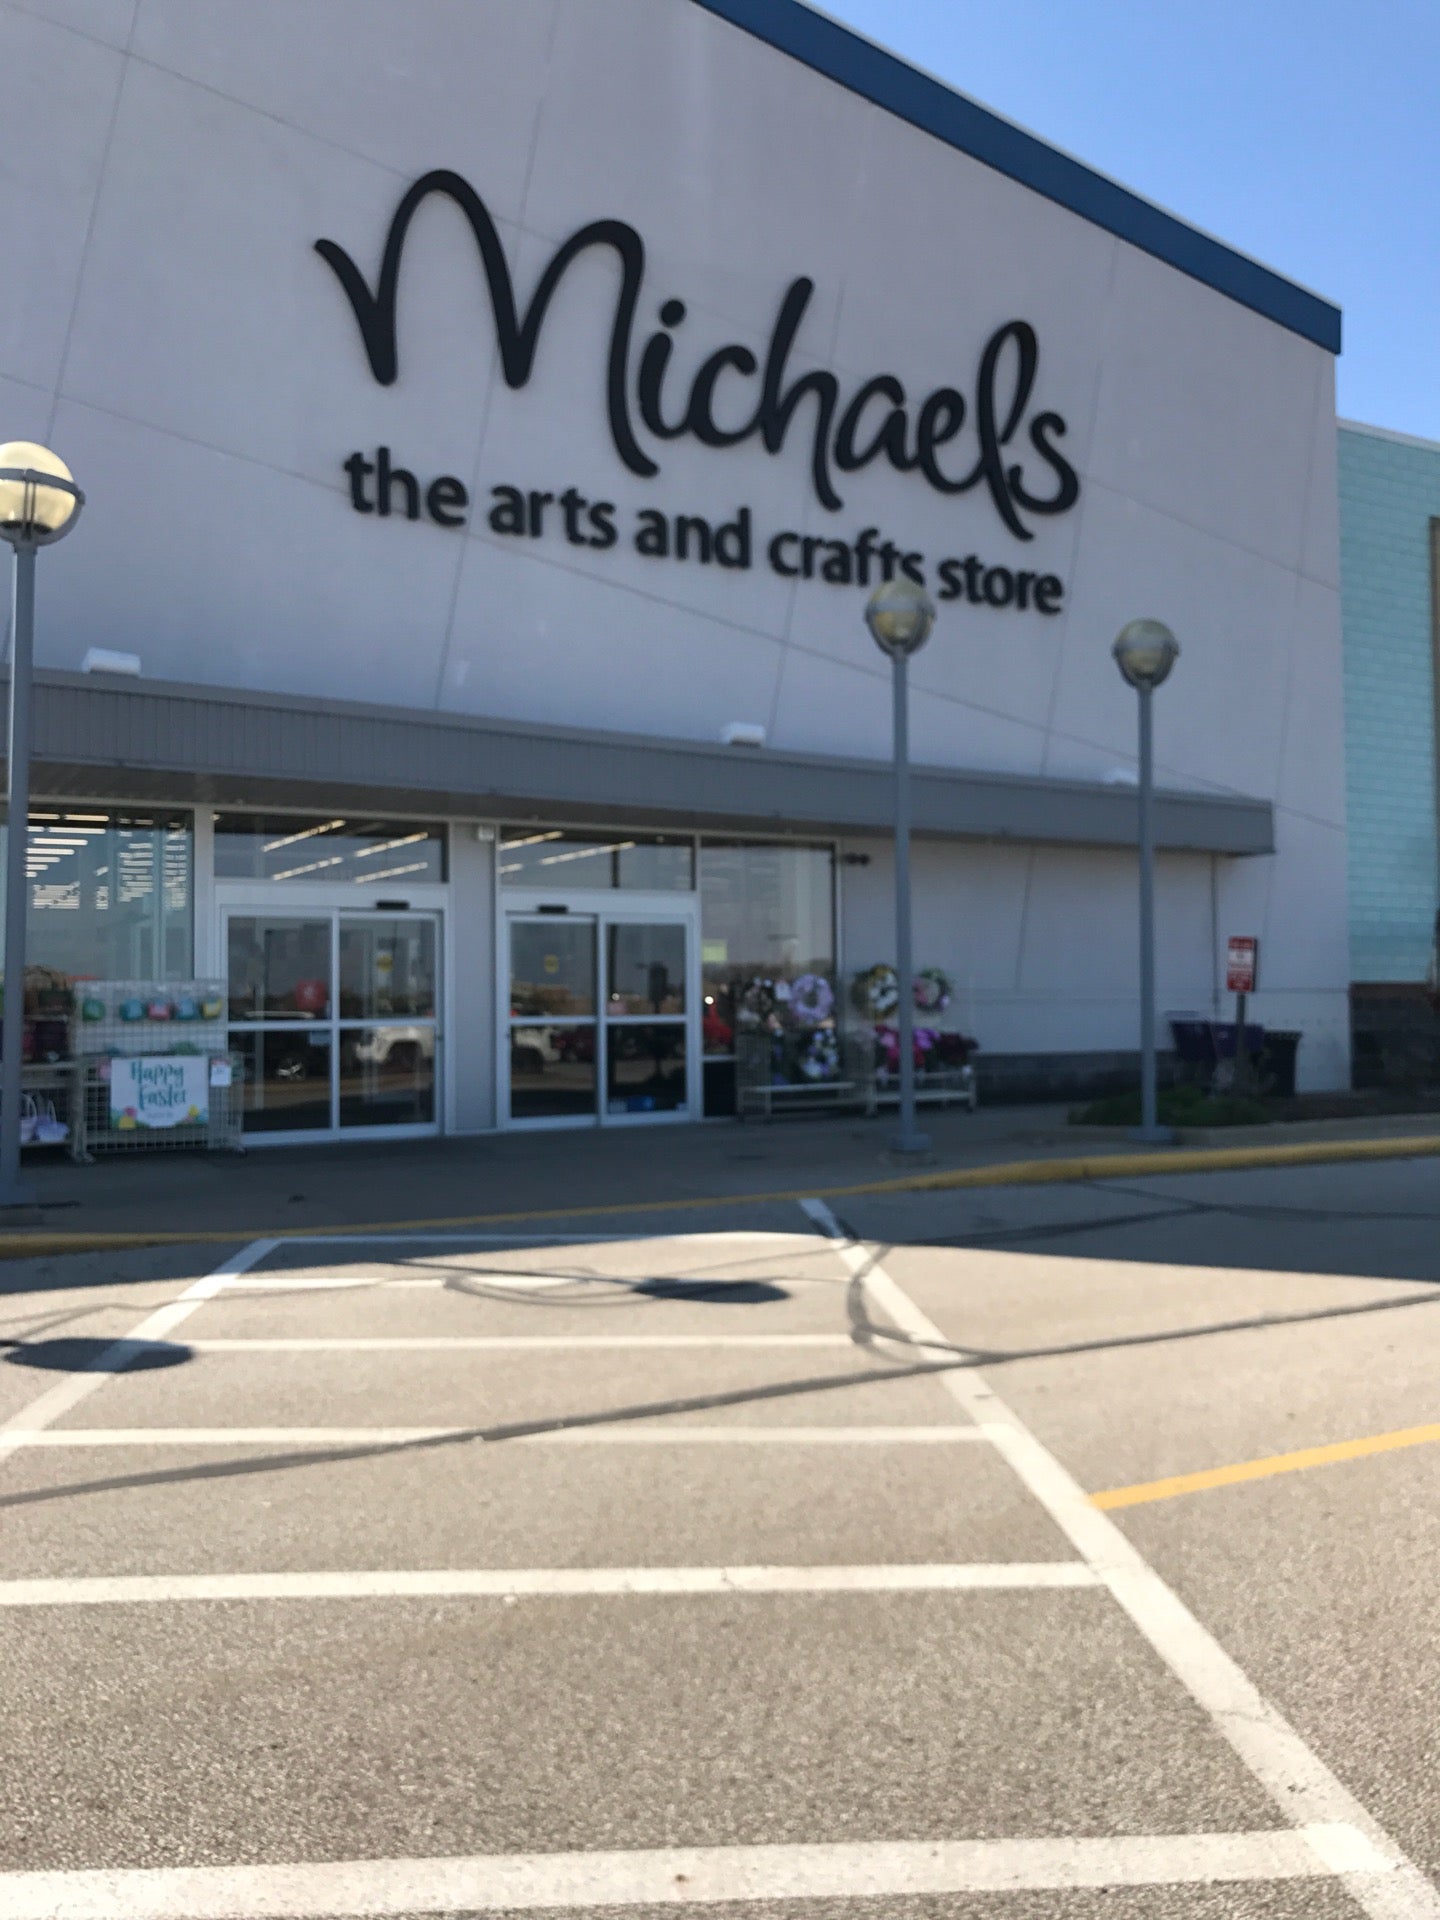 Michaels - Arts and Crafts Store